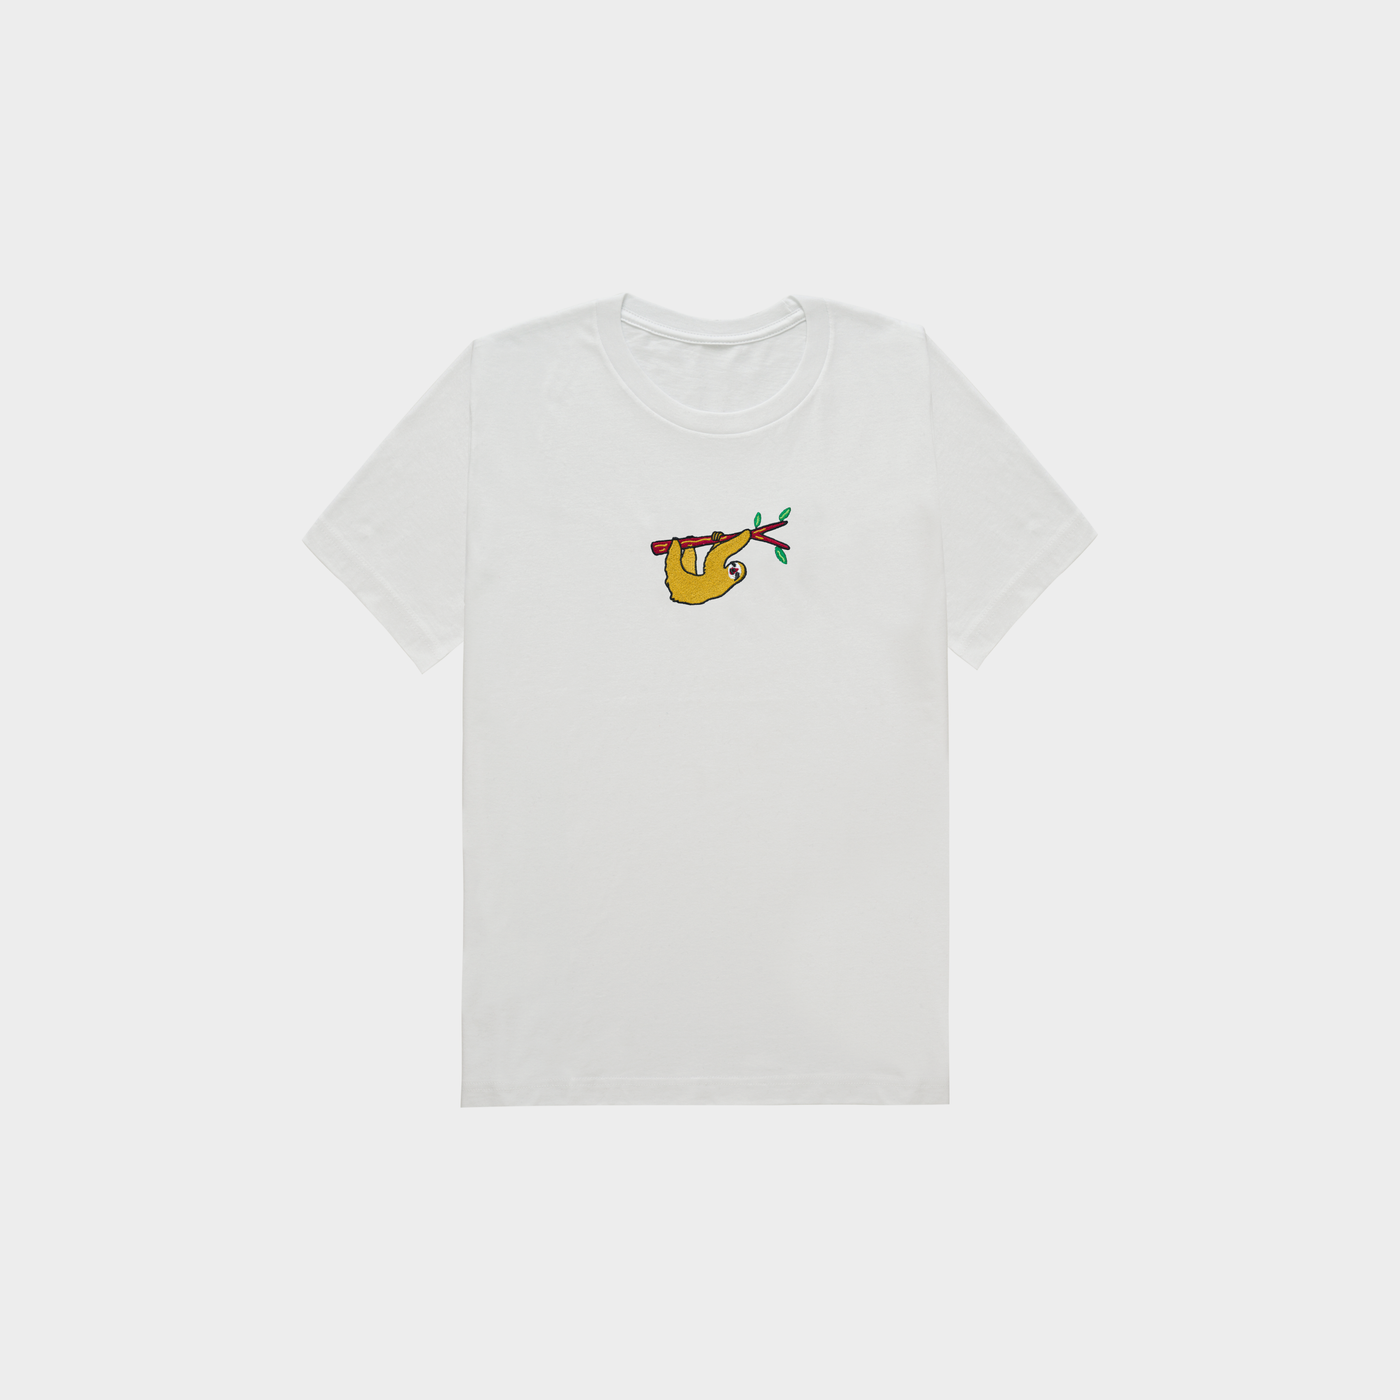 Bobby's Planet Kids Embroidered Sloth T-Shirt from South American Amazon Animals Collection in White Color#color_white